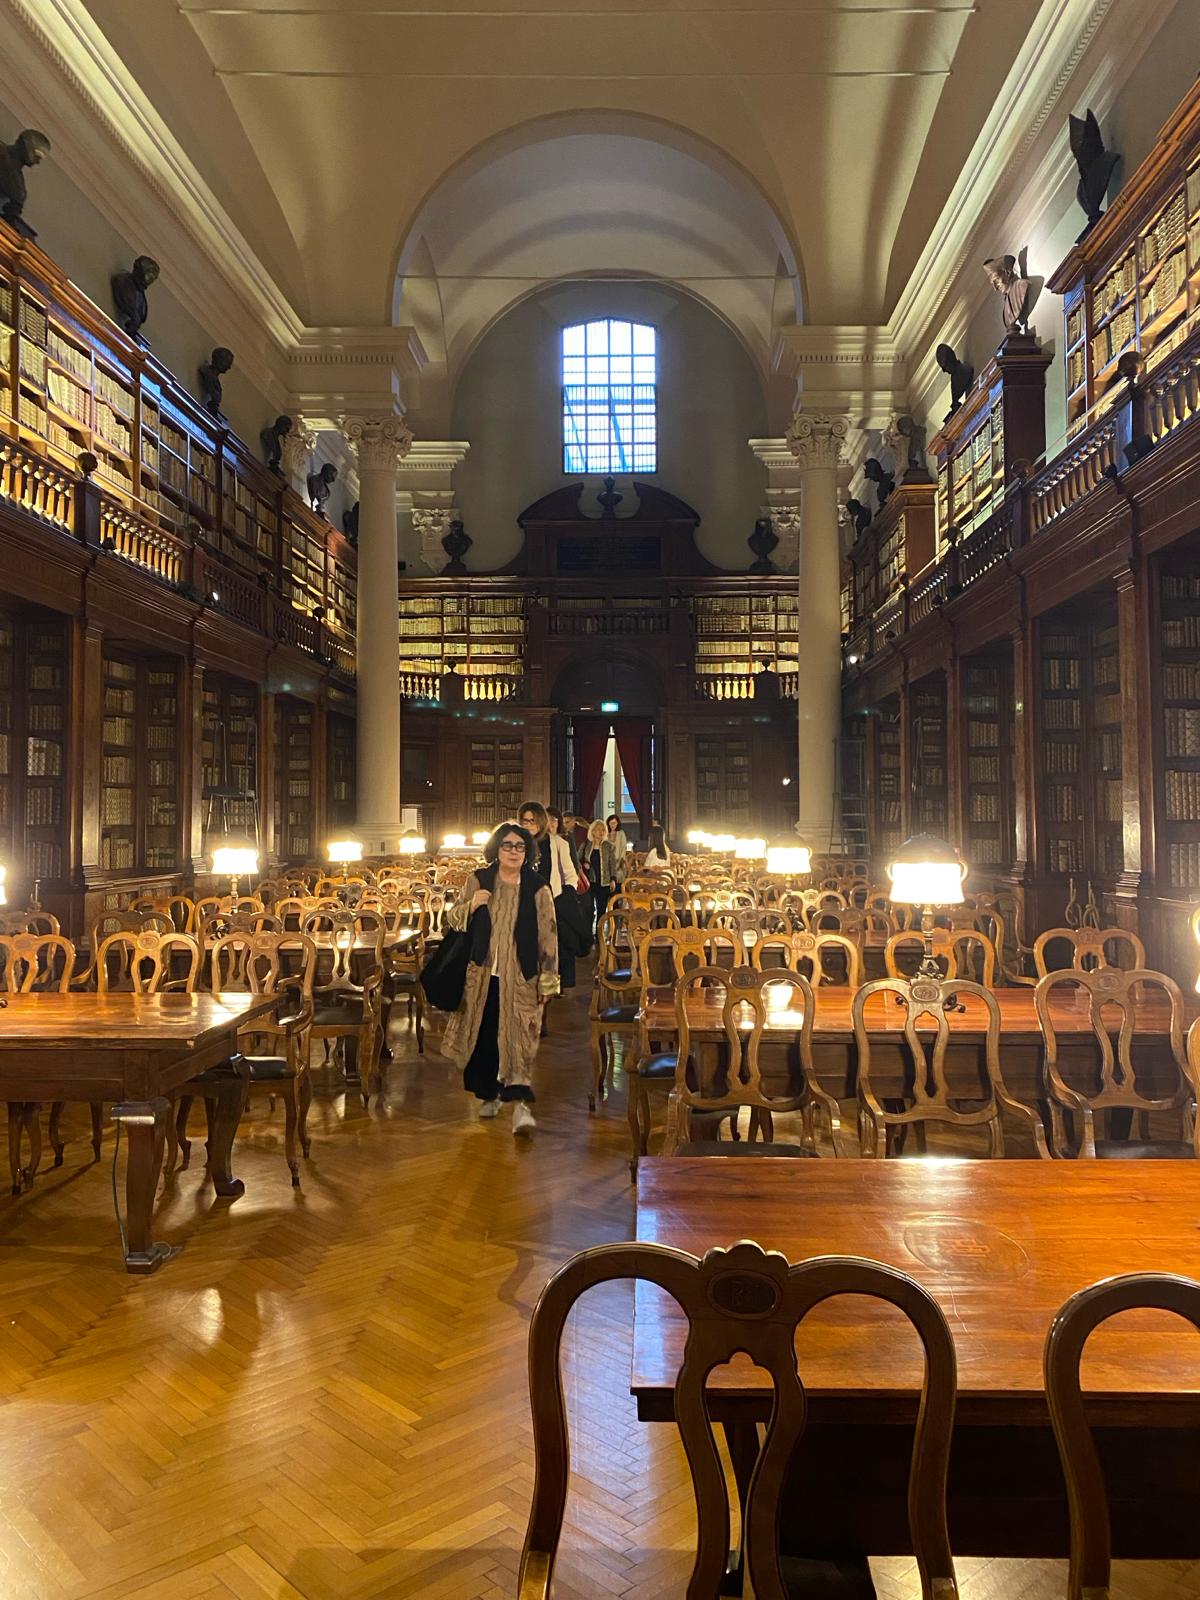 An exceptional historical place. The University Library of Bologna